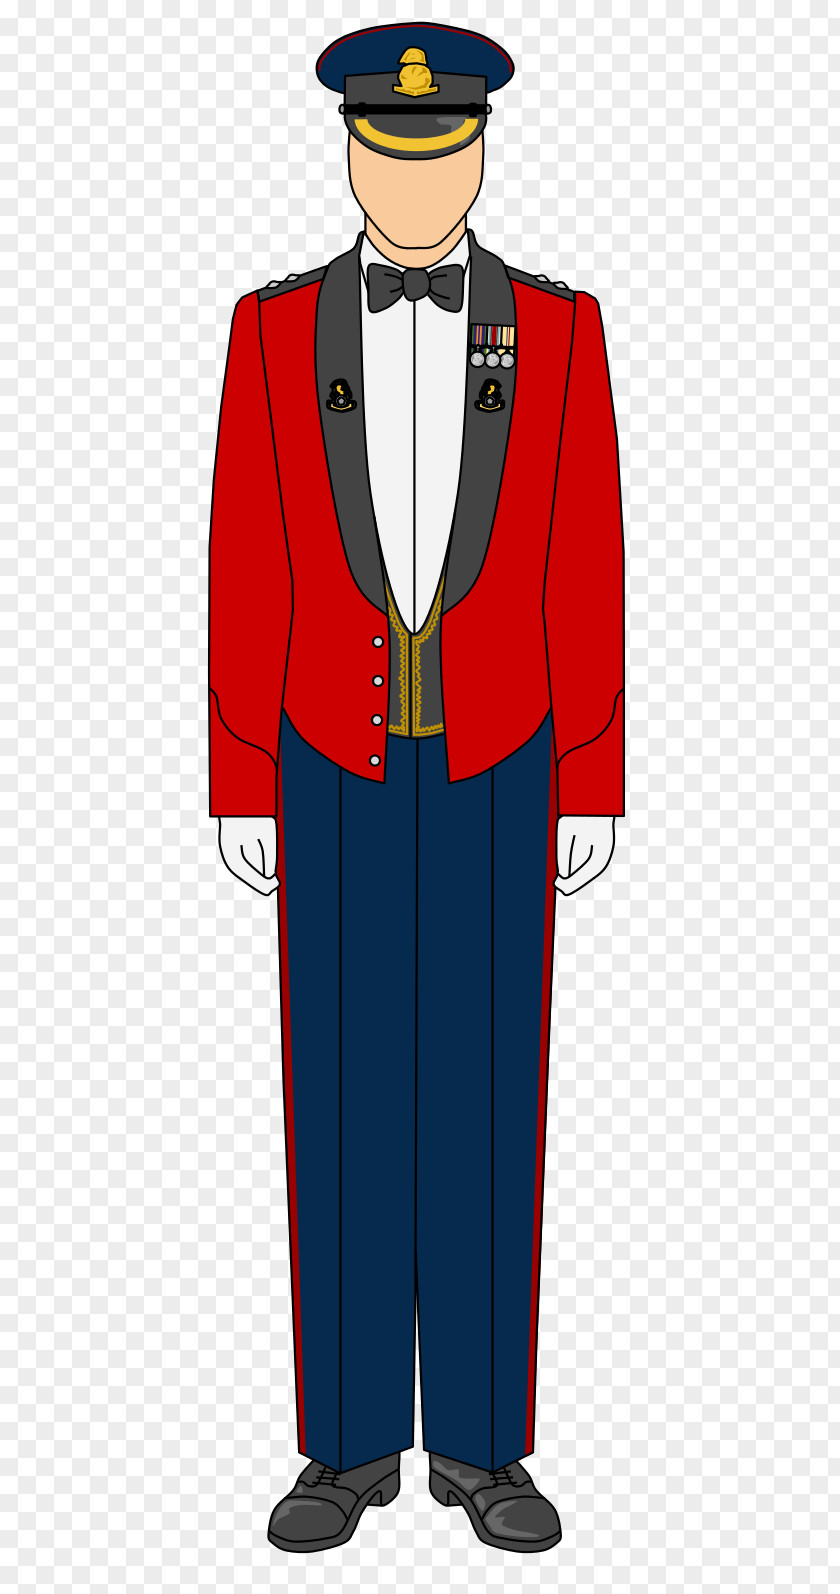 Military Mess Dress Uniform Uniforms Of The British Army Officer PNG